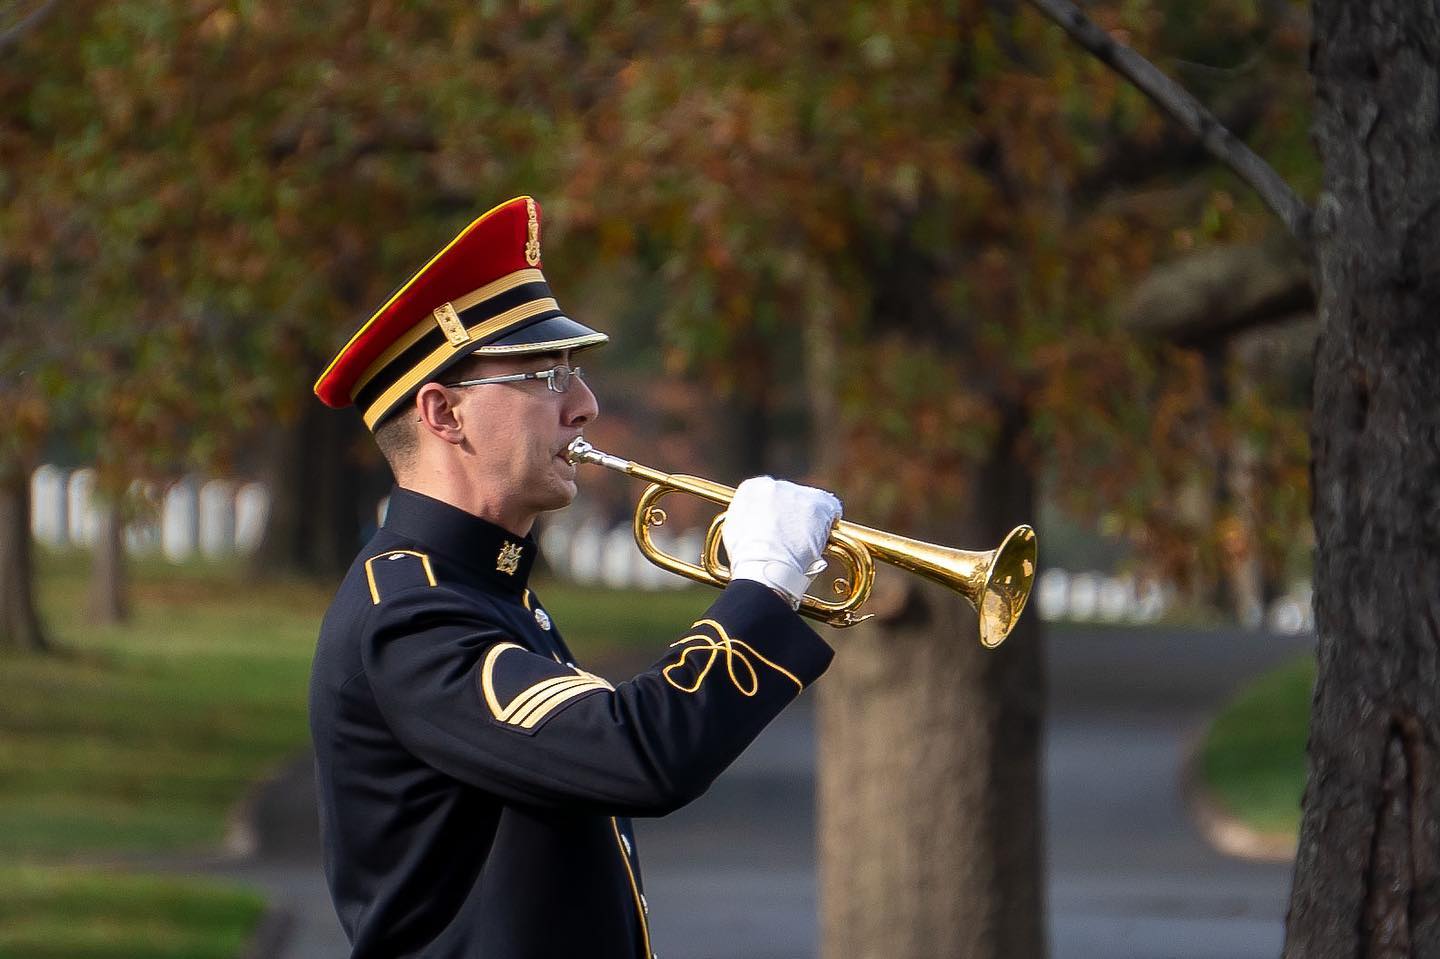 A bugler plays Taps at a full honors service in section 67 of Arlington National Cemetery as the leaves changed last week.

This bugler is part of the US Army Band, "Pershings Own". With America’s entrance into World War I and the mobilization of a huge force, there arose a further need for music in the military to provide for ceremonies, parades, concerts, and for the general morale of troops. 

Today, the US Army Band’s mission is to “provide music throughout the spectrum of military operations, to instill in our soldiers the will to fight and win, foster the support of our citizens, and promote our national interests at home and abroad.

One of these missions is to honor veterans through the playing of Taps at military funerals here at Arlington.